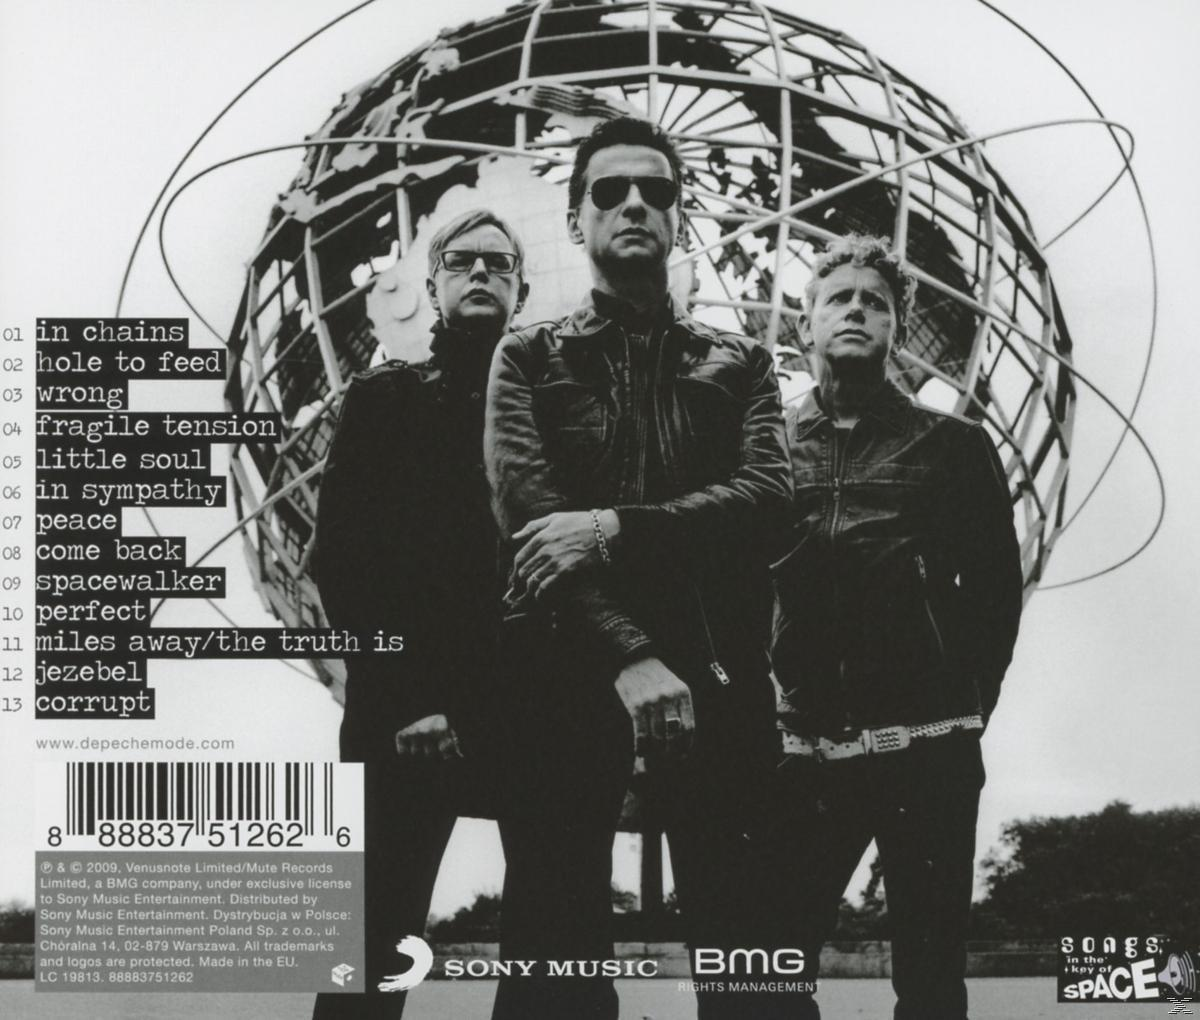 Depeche Mode OF UNIVERSE THE - SOUNDS - (CD)